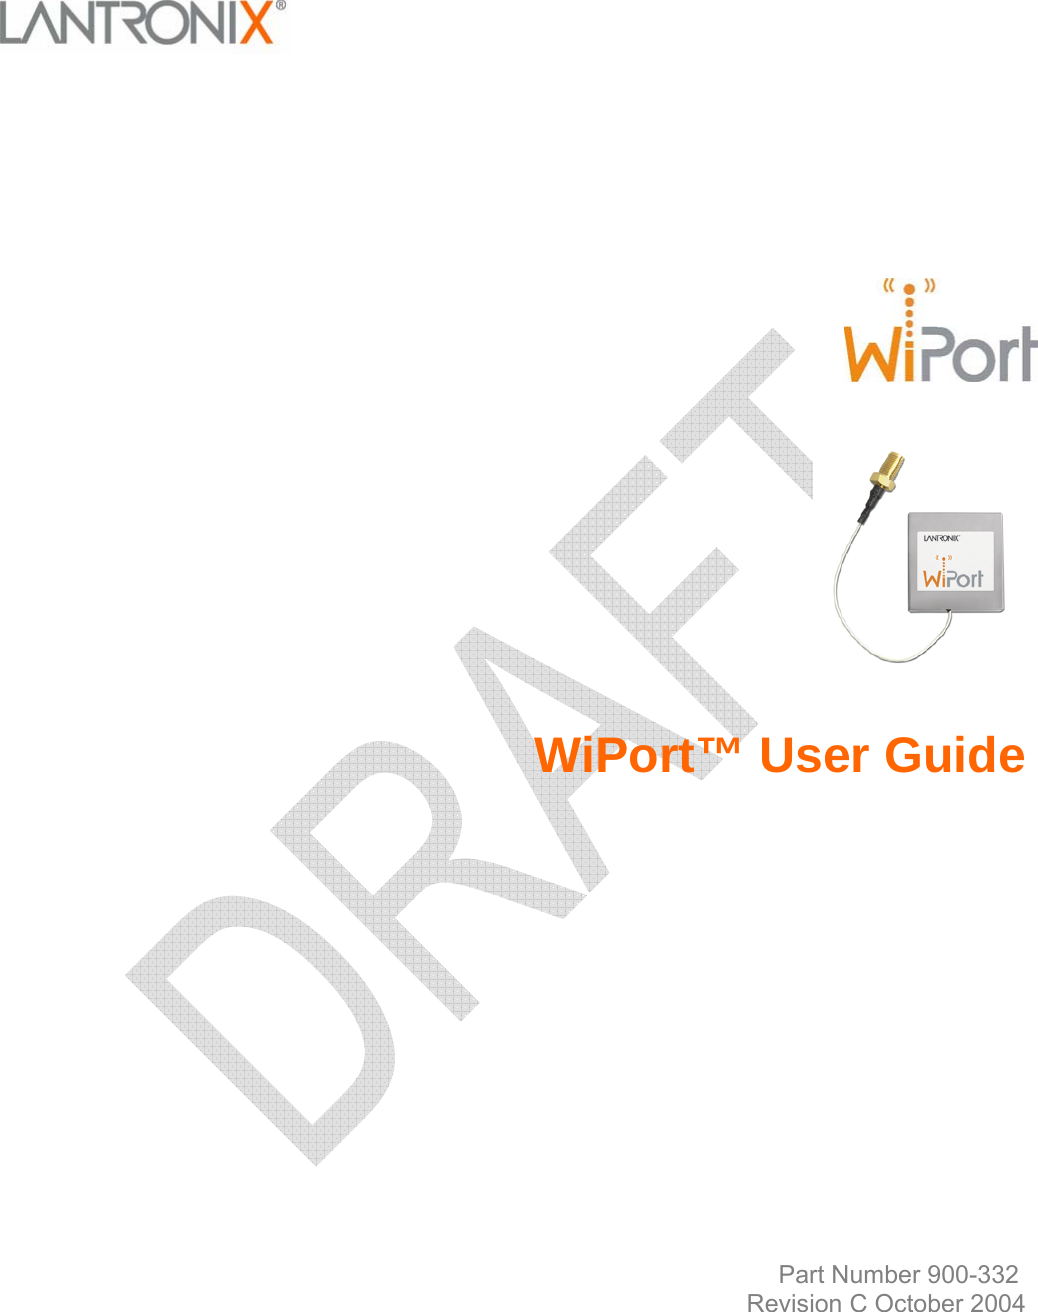                          WiPort™ User Guide               Part Number 900-332  Revision C October 2004